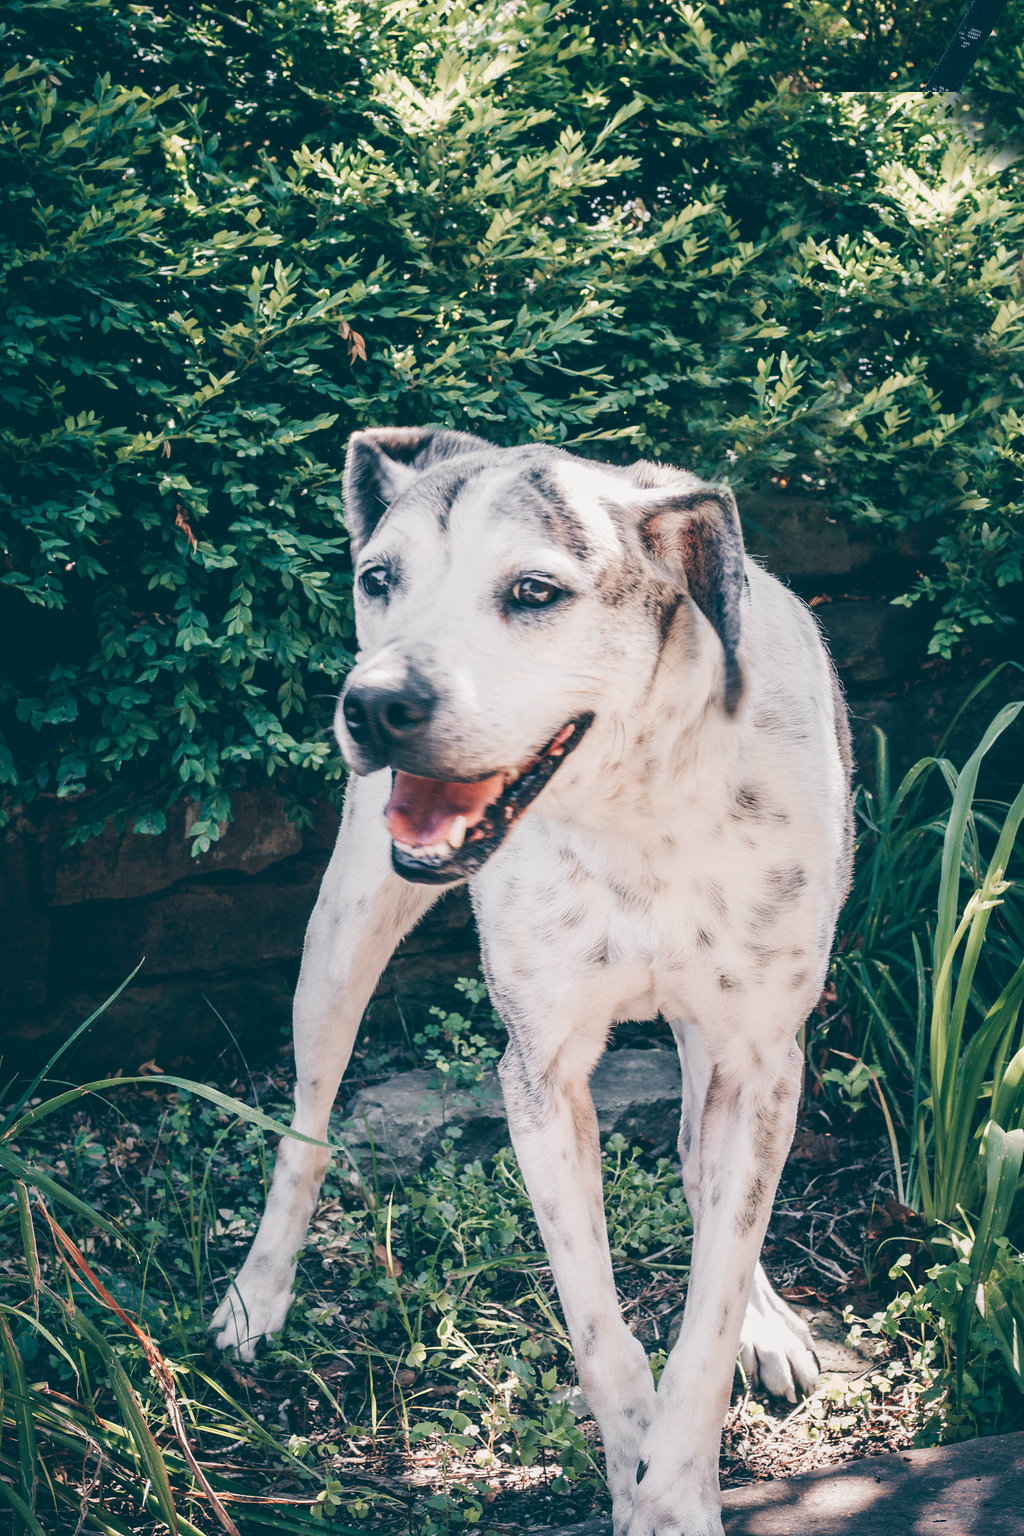 Large ,white dog standing in front of bushes.